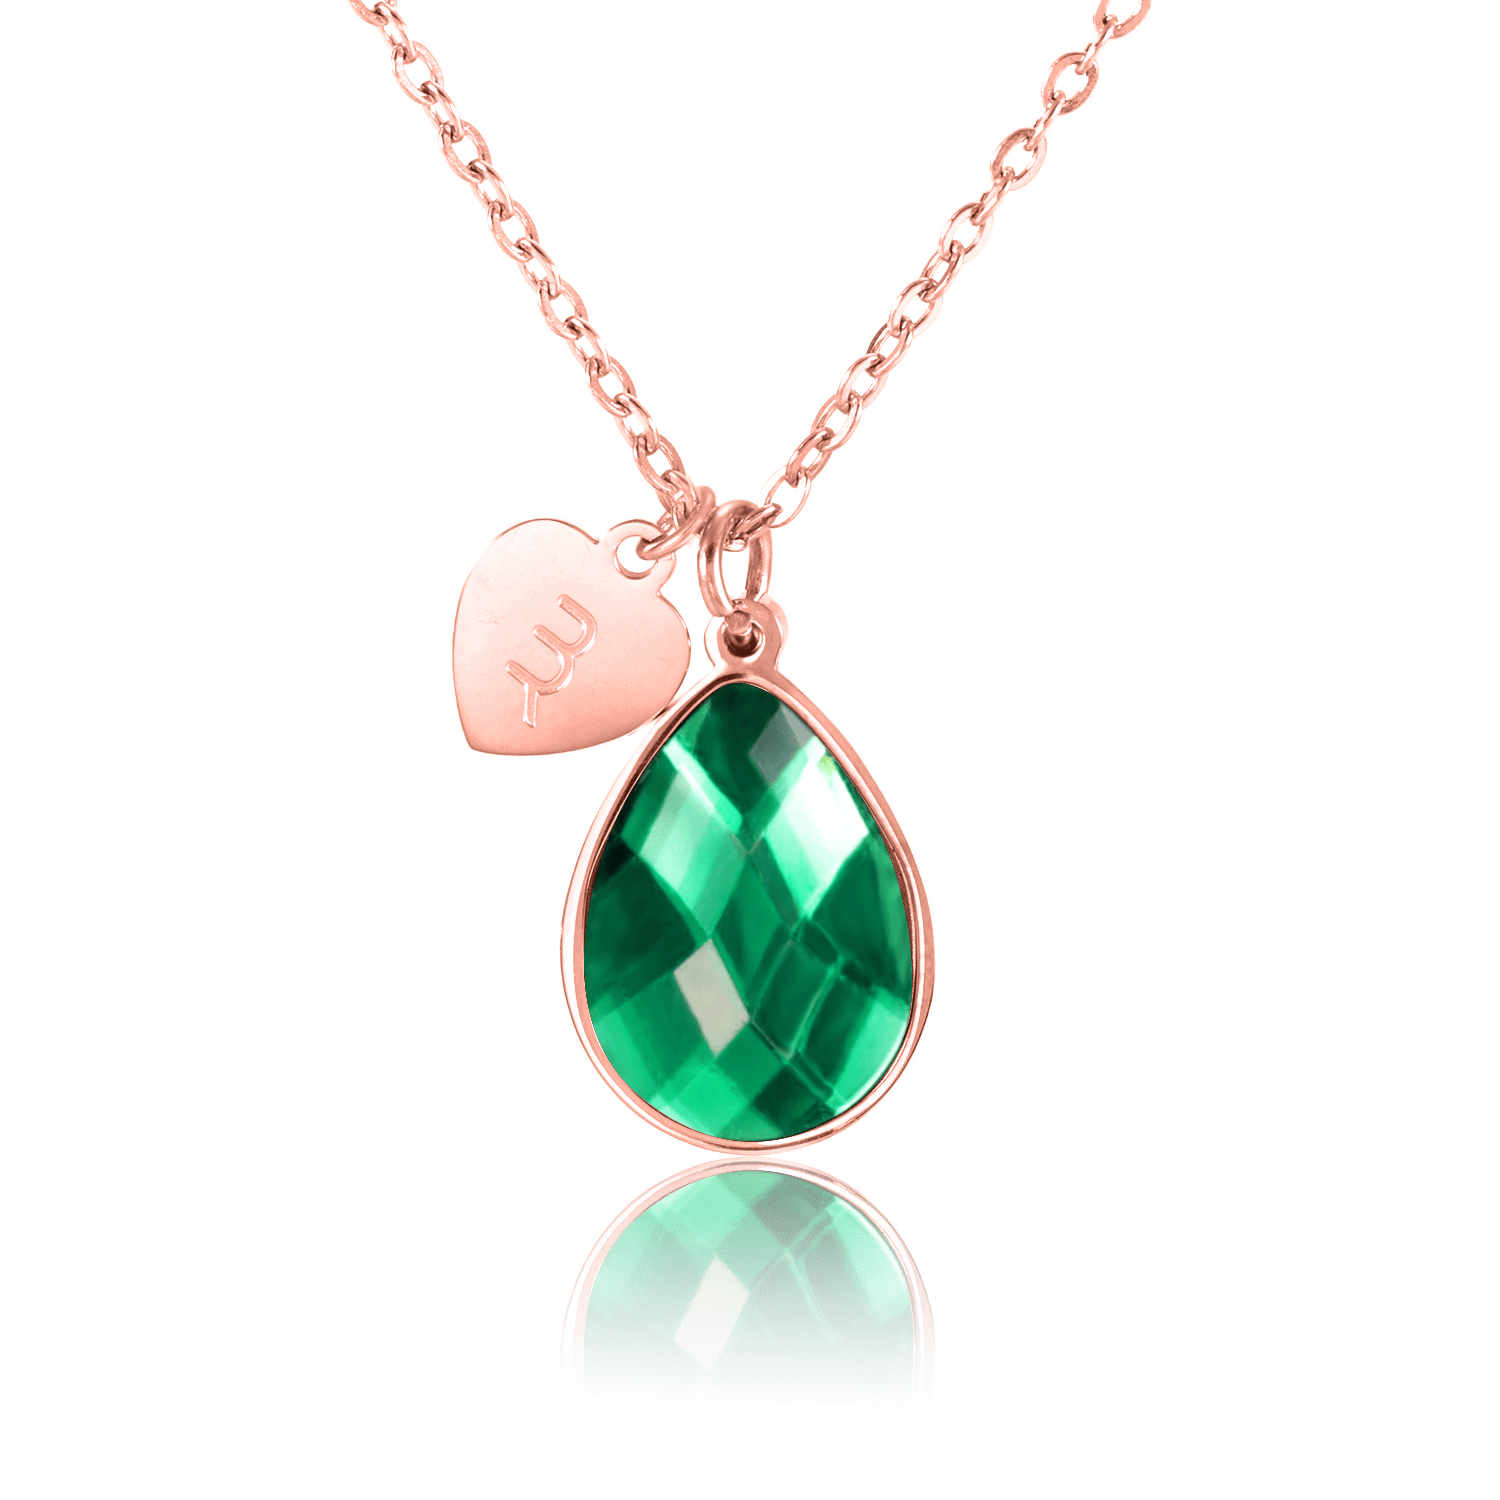 bianco rosso Necklaces Rose Gold May Birthstone - Emerald cyprus greece jewelry gift free shipping europe worldwide